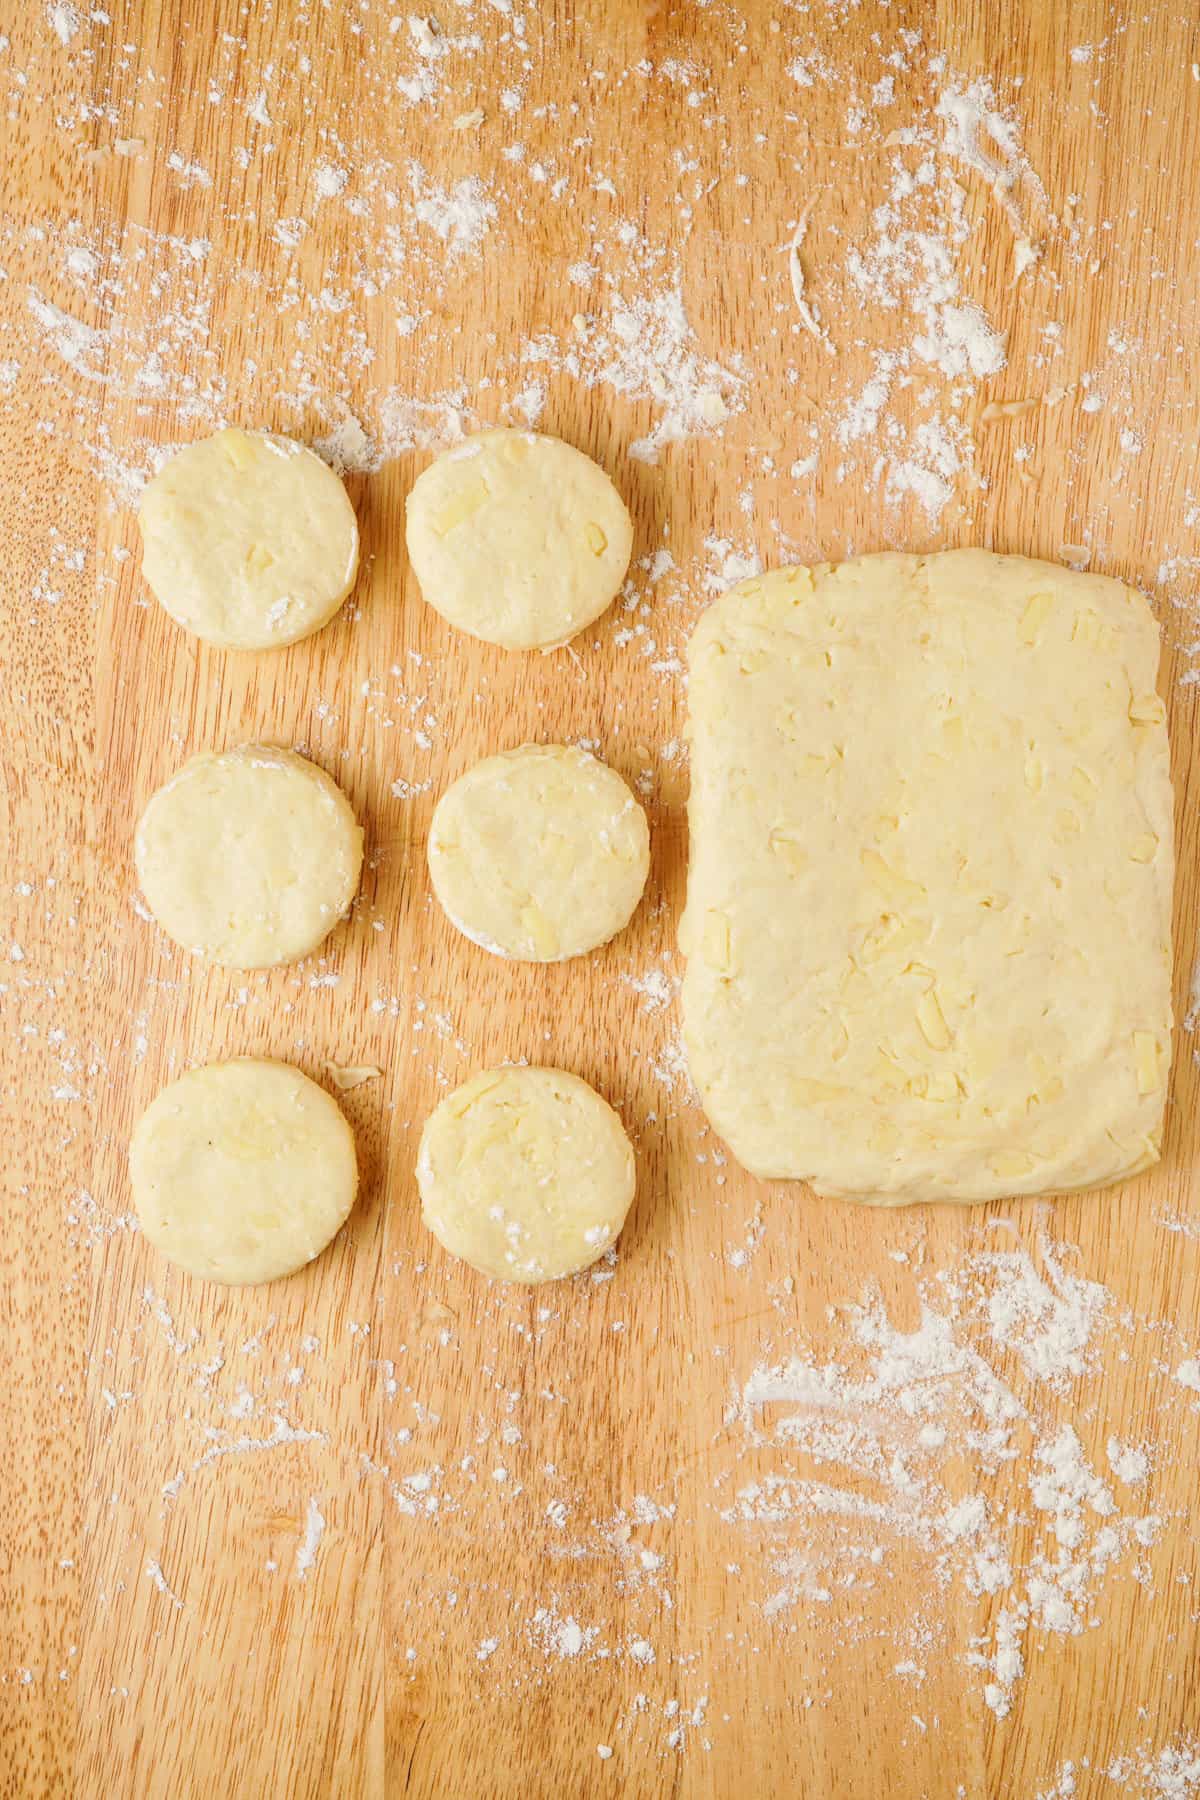 Overhead view showing punched out biscuits next to the layered, flattened dough.